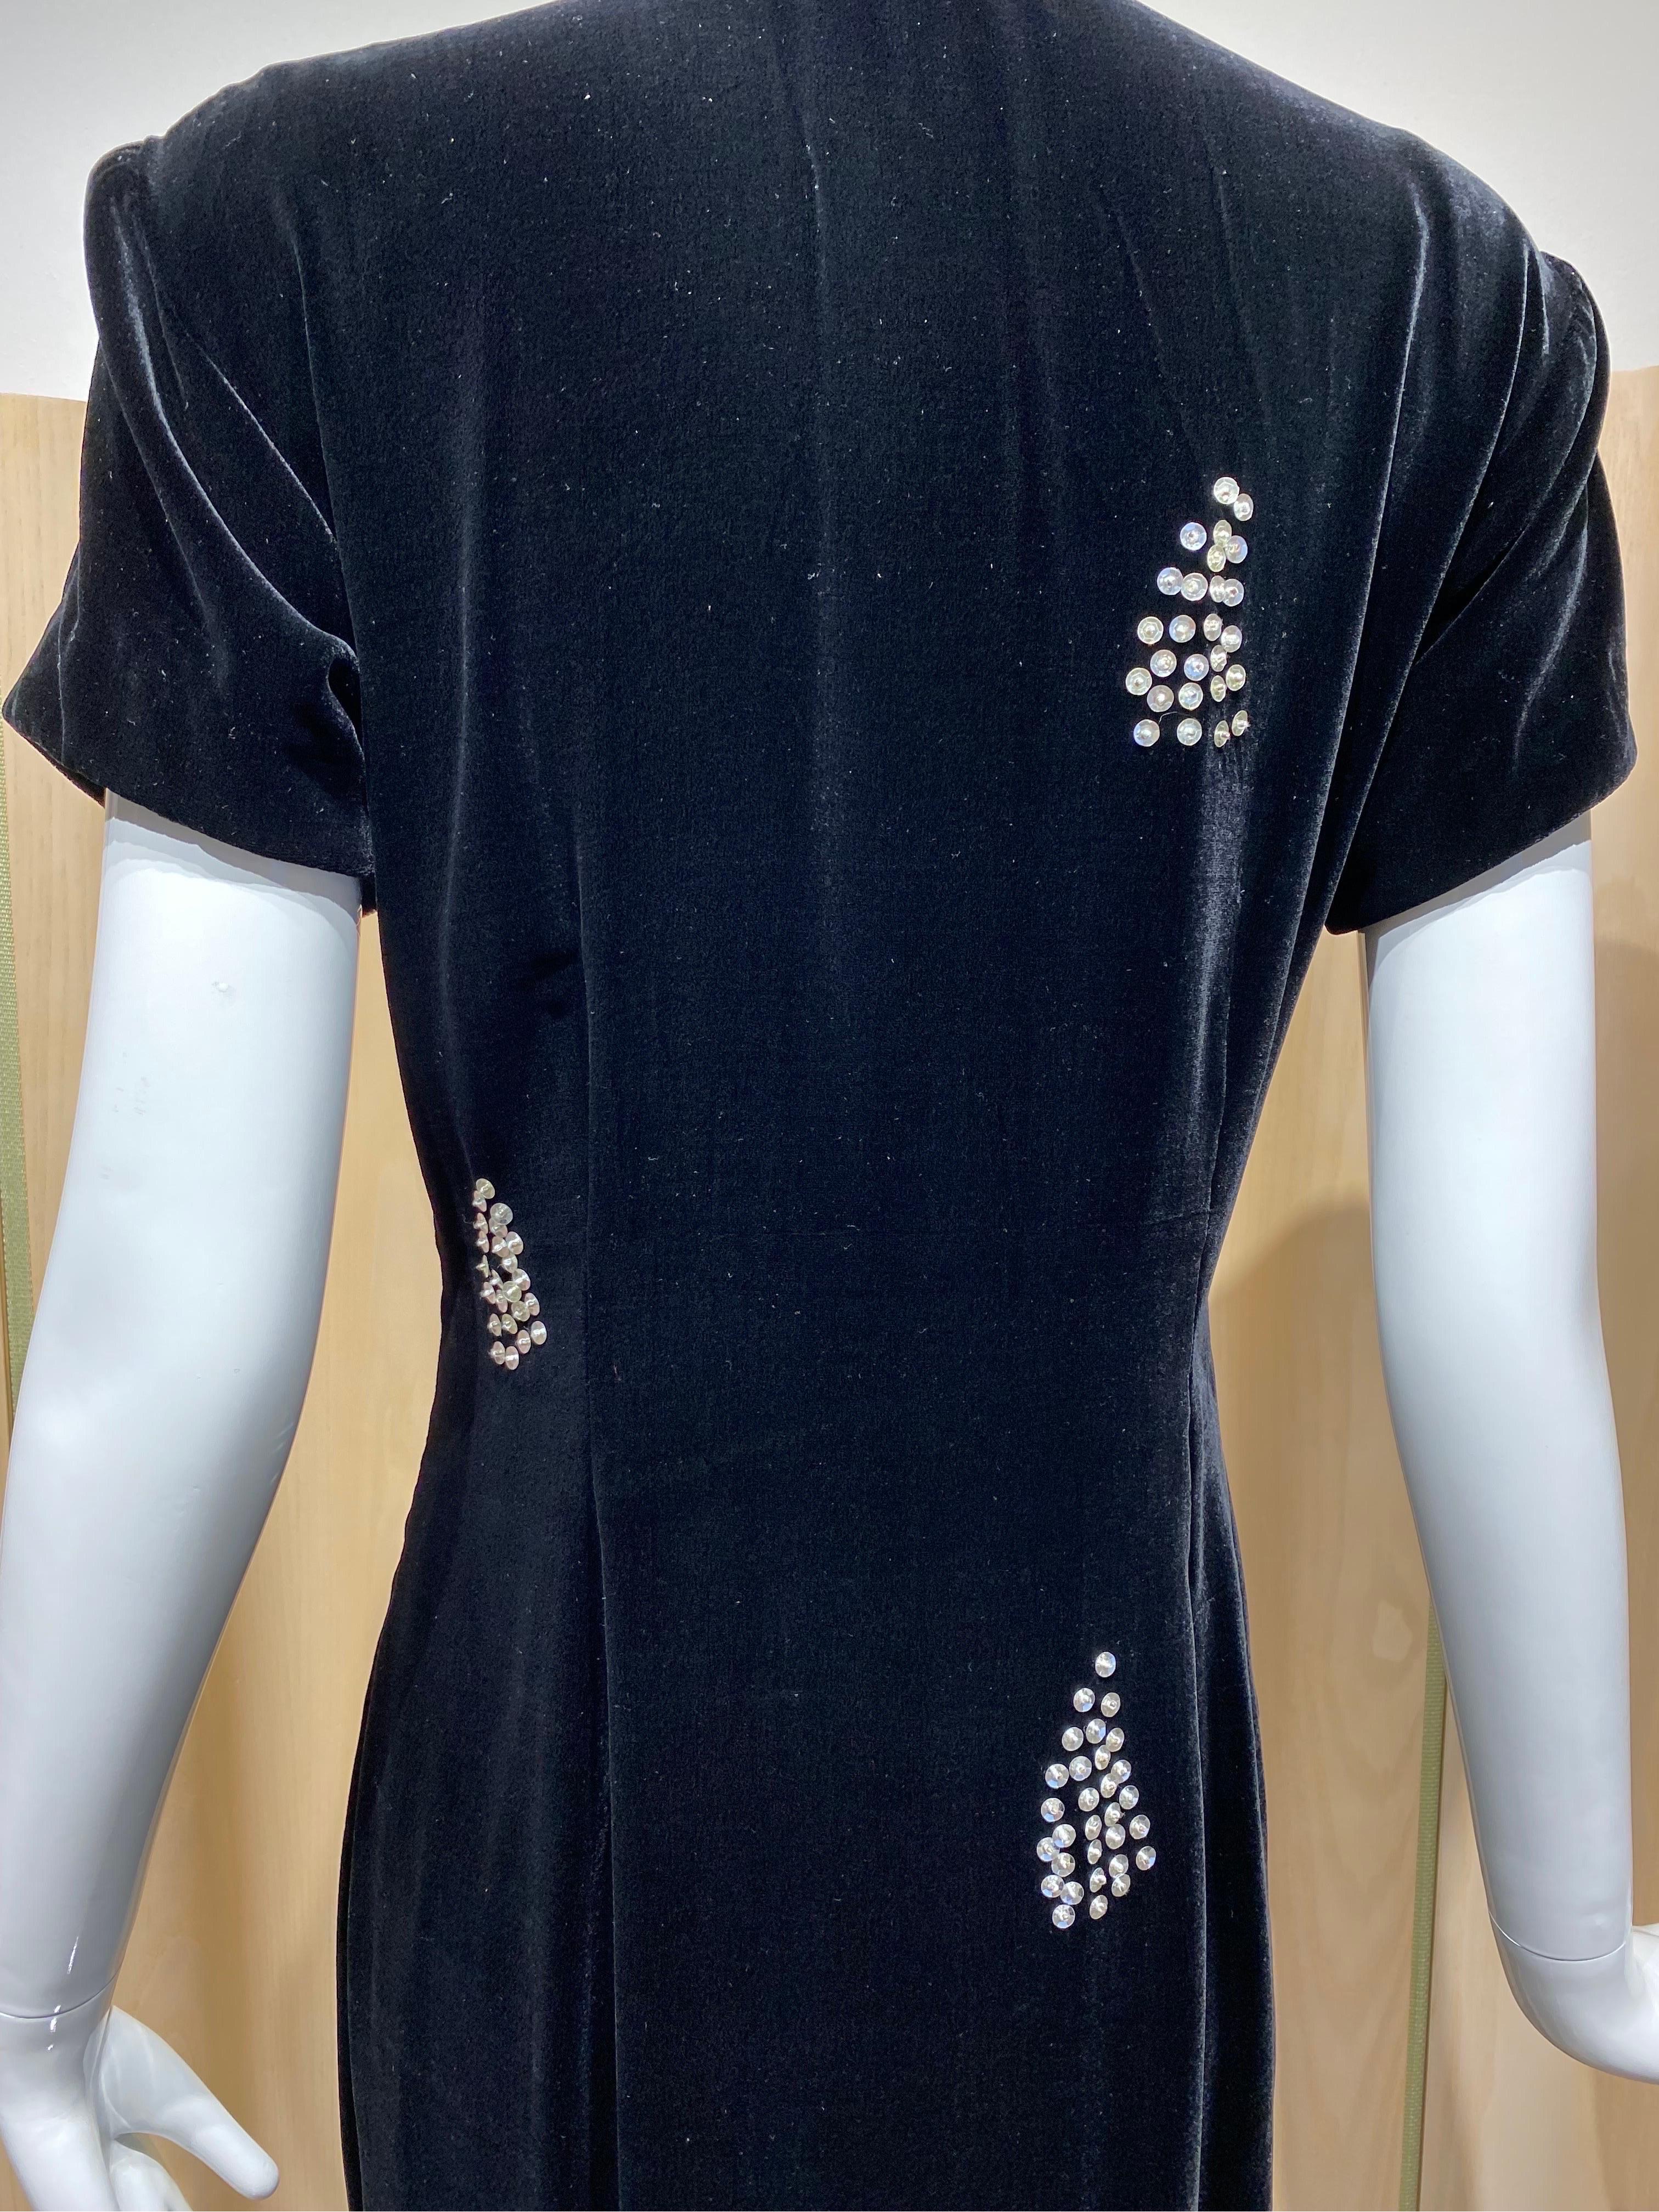 1970s Black Velvet Chinese Qi Pao Embroidered Cocktail Dress with Sequins  3